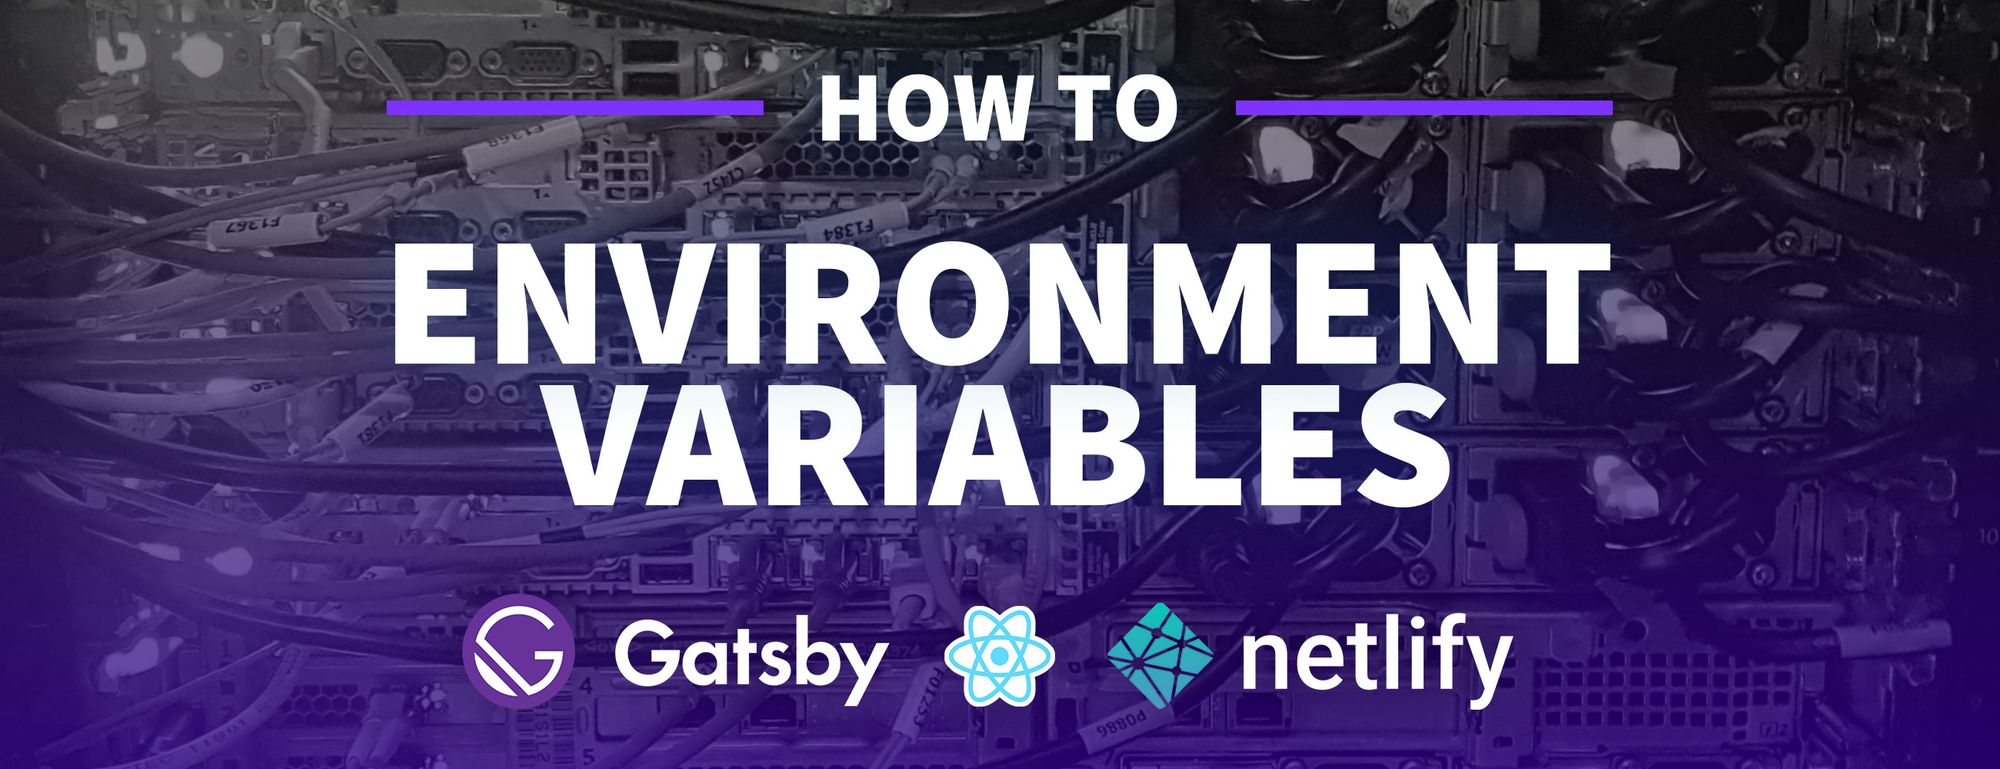 What Are Environment Variables and How Can I Use Them with Gatsby and Netlify?